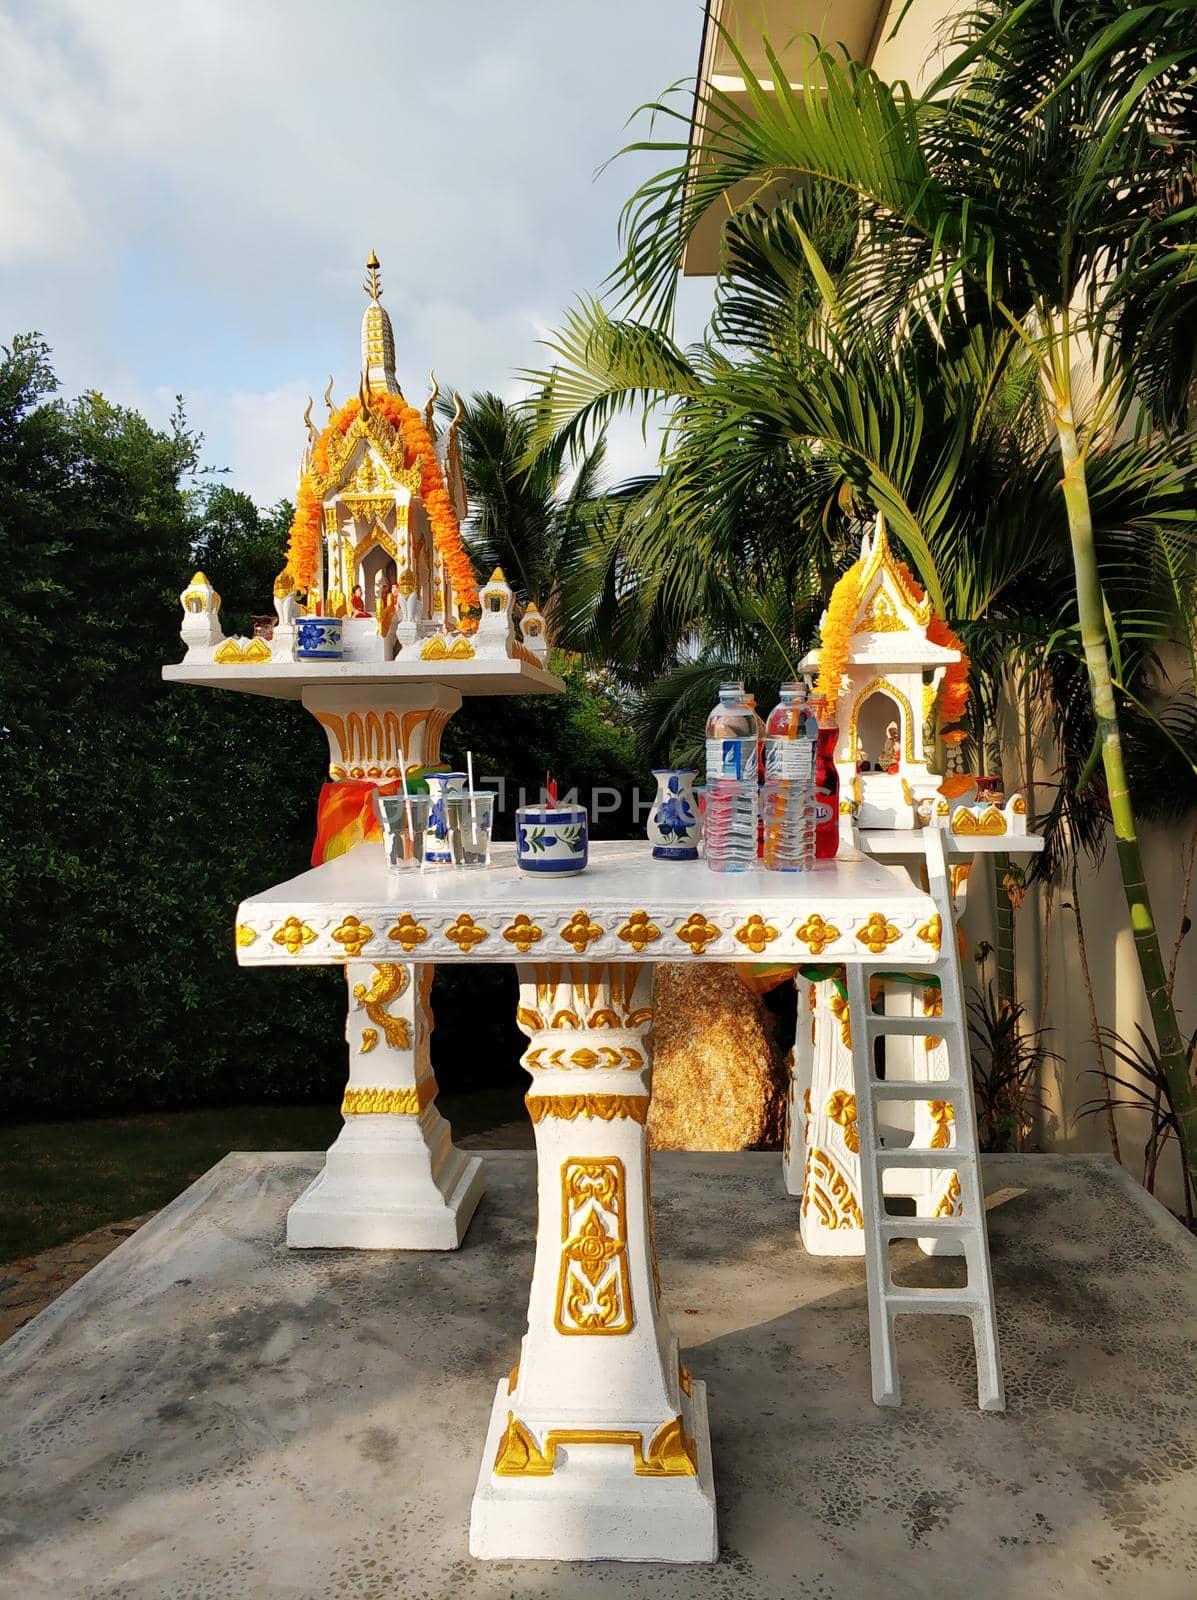 Prayer temple. Buddhist religion, offerings to the gods.